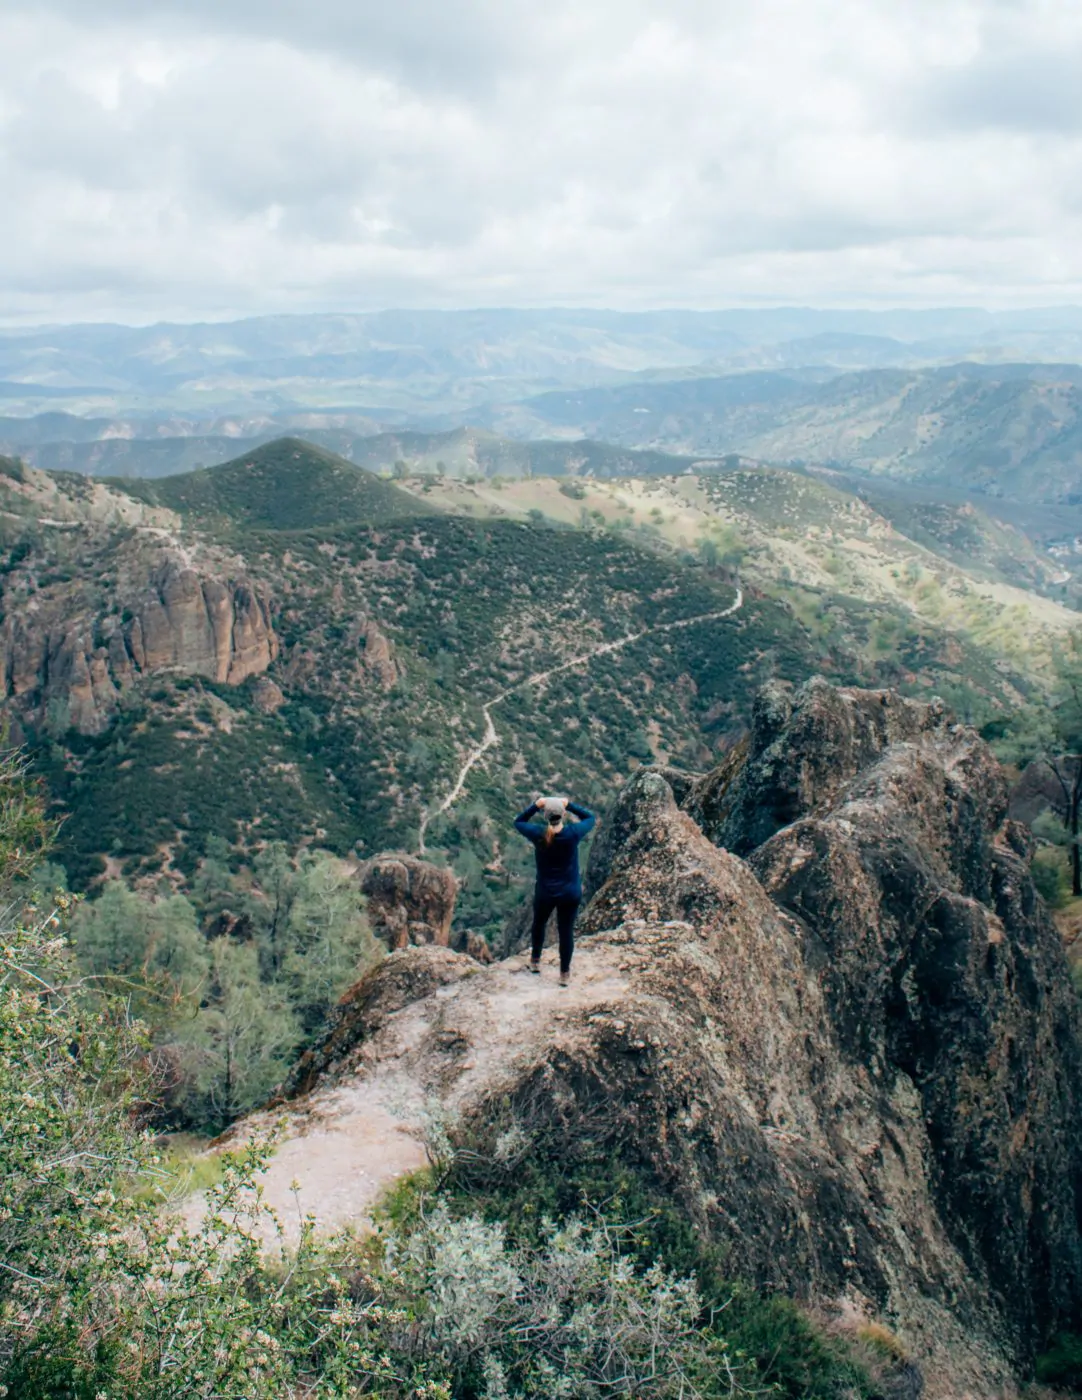 Me looking out into the valley from the High Peaks Trail in Pinnacles National Park